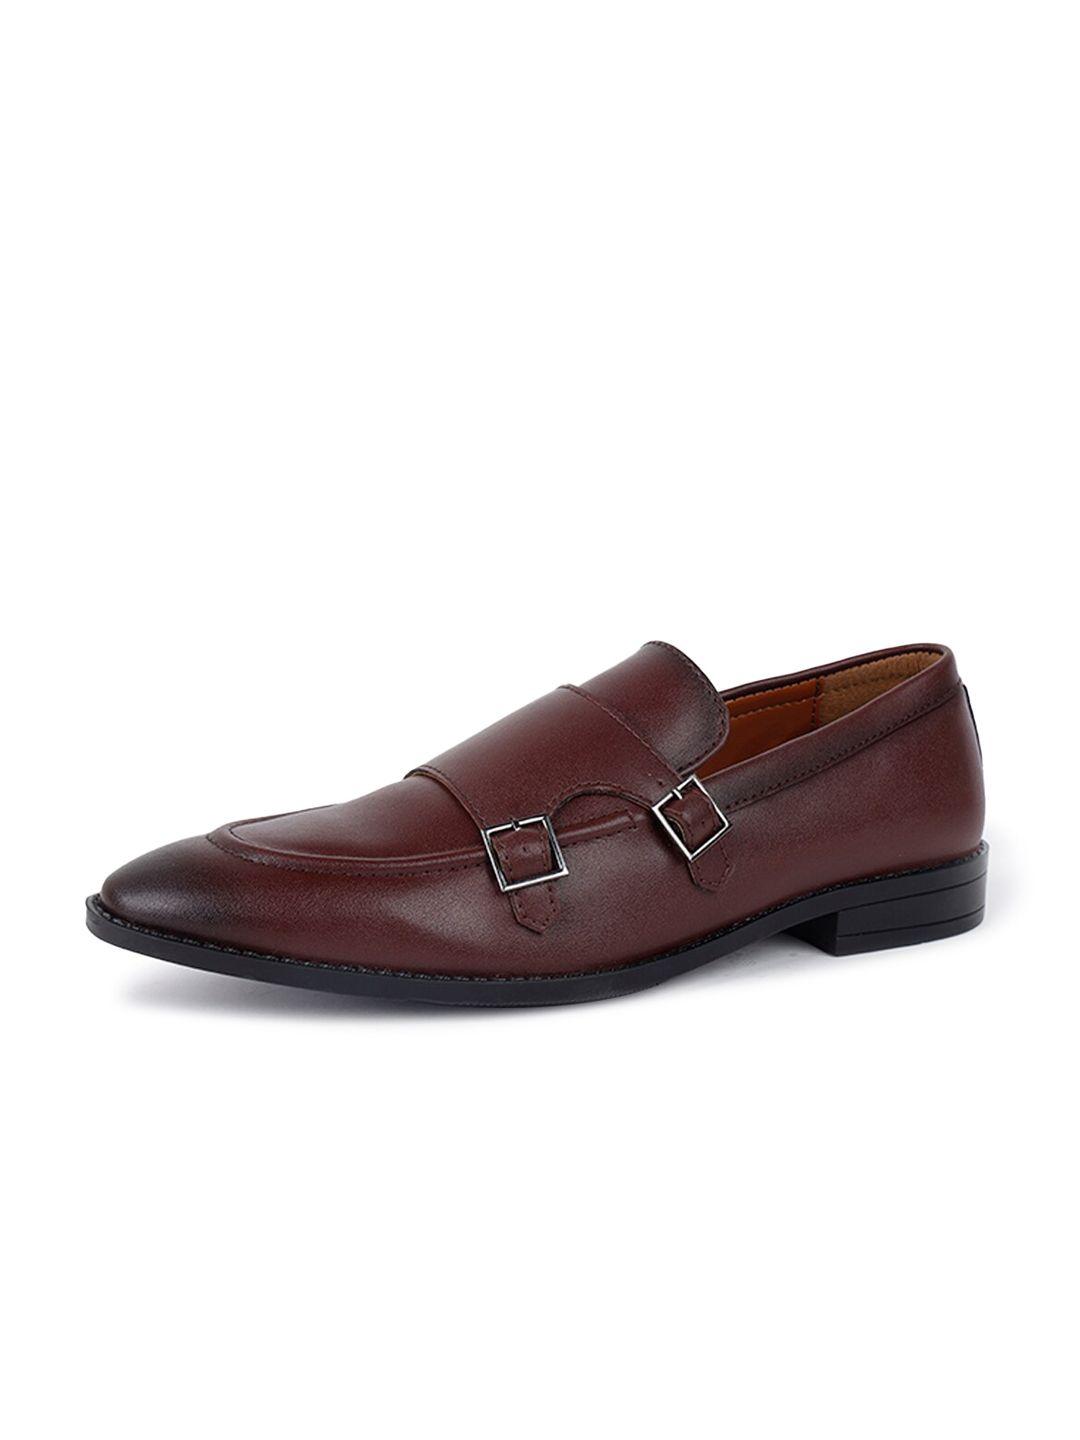 louis-stitch-men-round-toe-leather-formal-monk-shoes